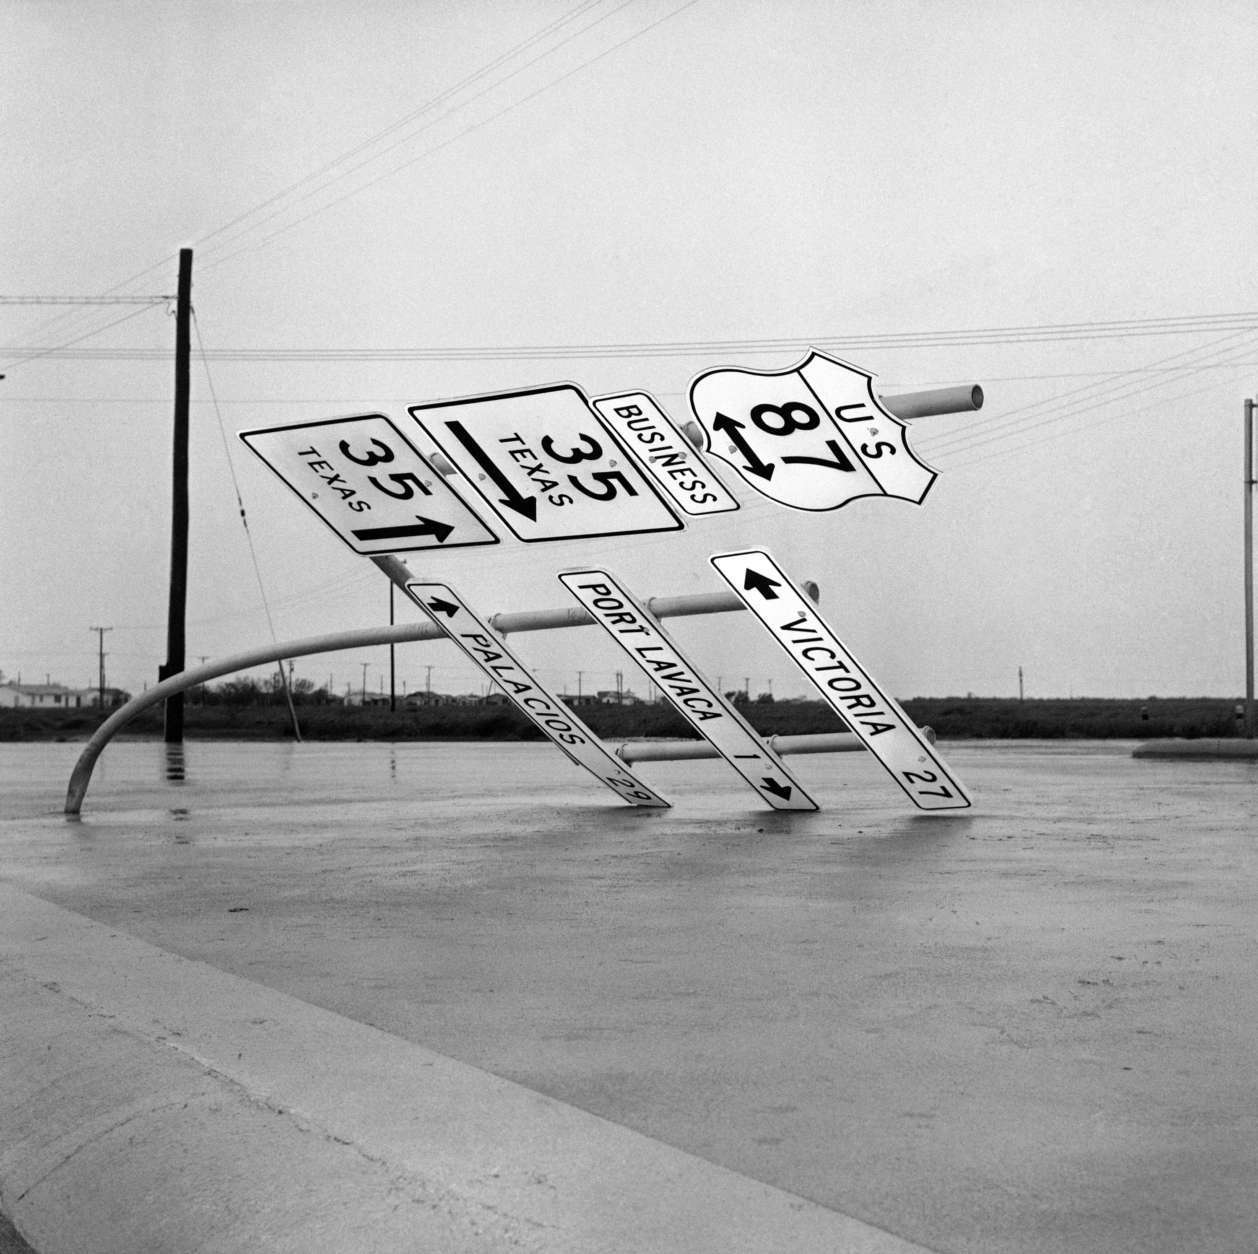 Fierce winds accompanying hurricane Carla bent this heavy steel pole holding road signs outside Port Lavaca, Texas on Sept. 12, 1961. The hurricane caused extensive damage in this coastal city. (AP Photo/Ted Powers)